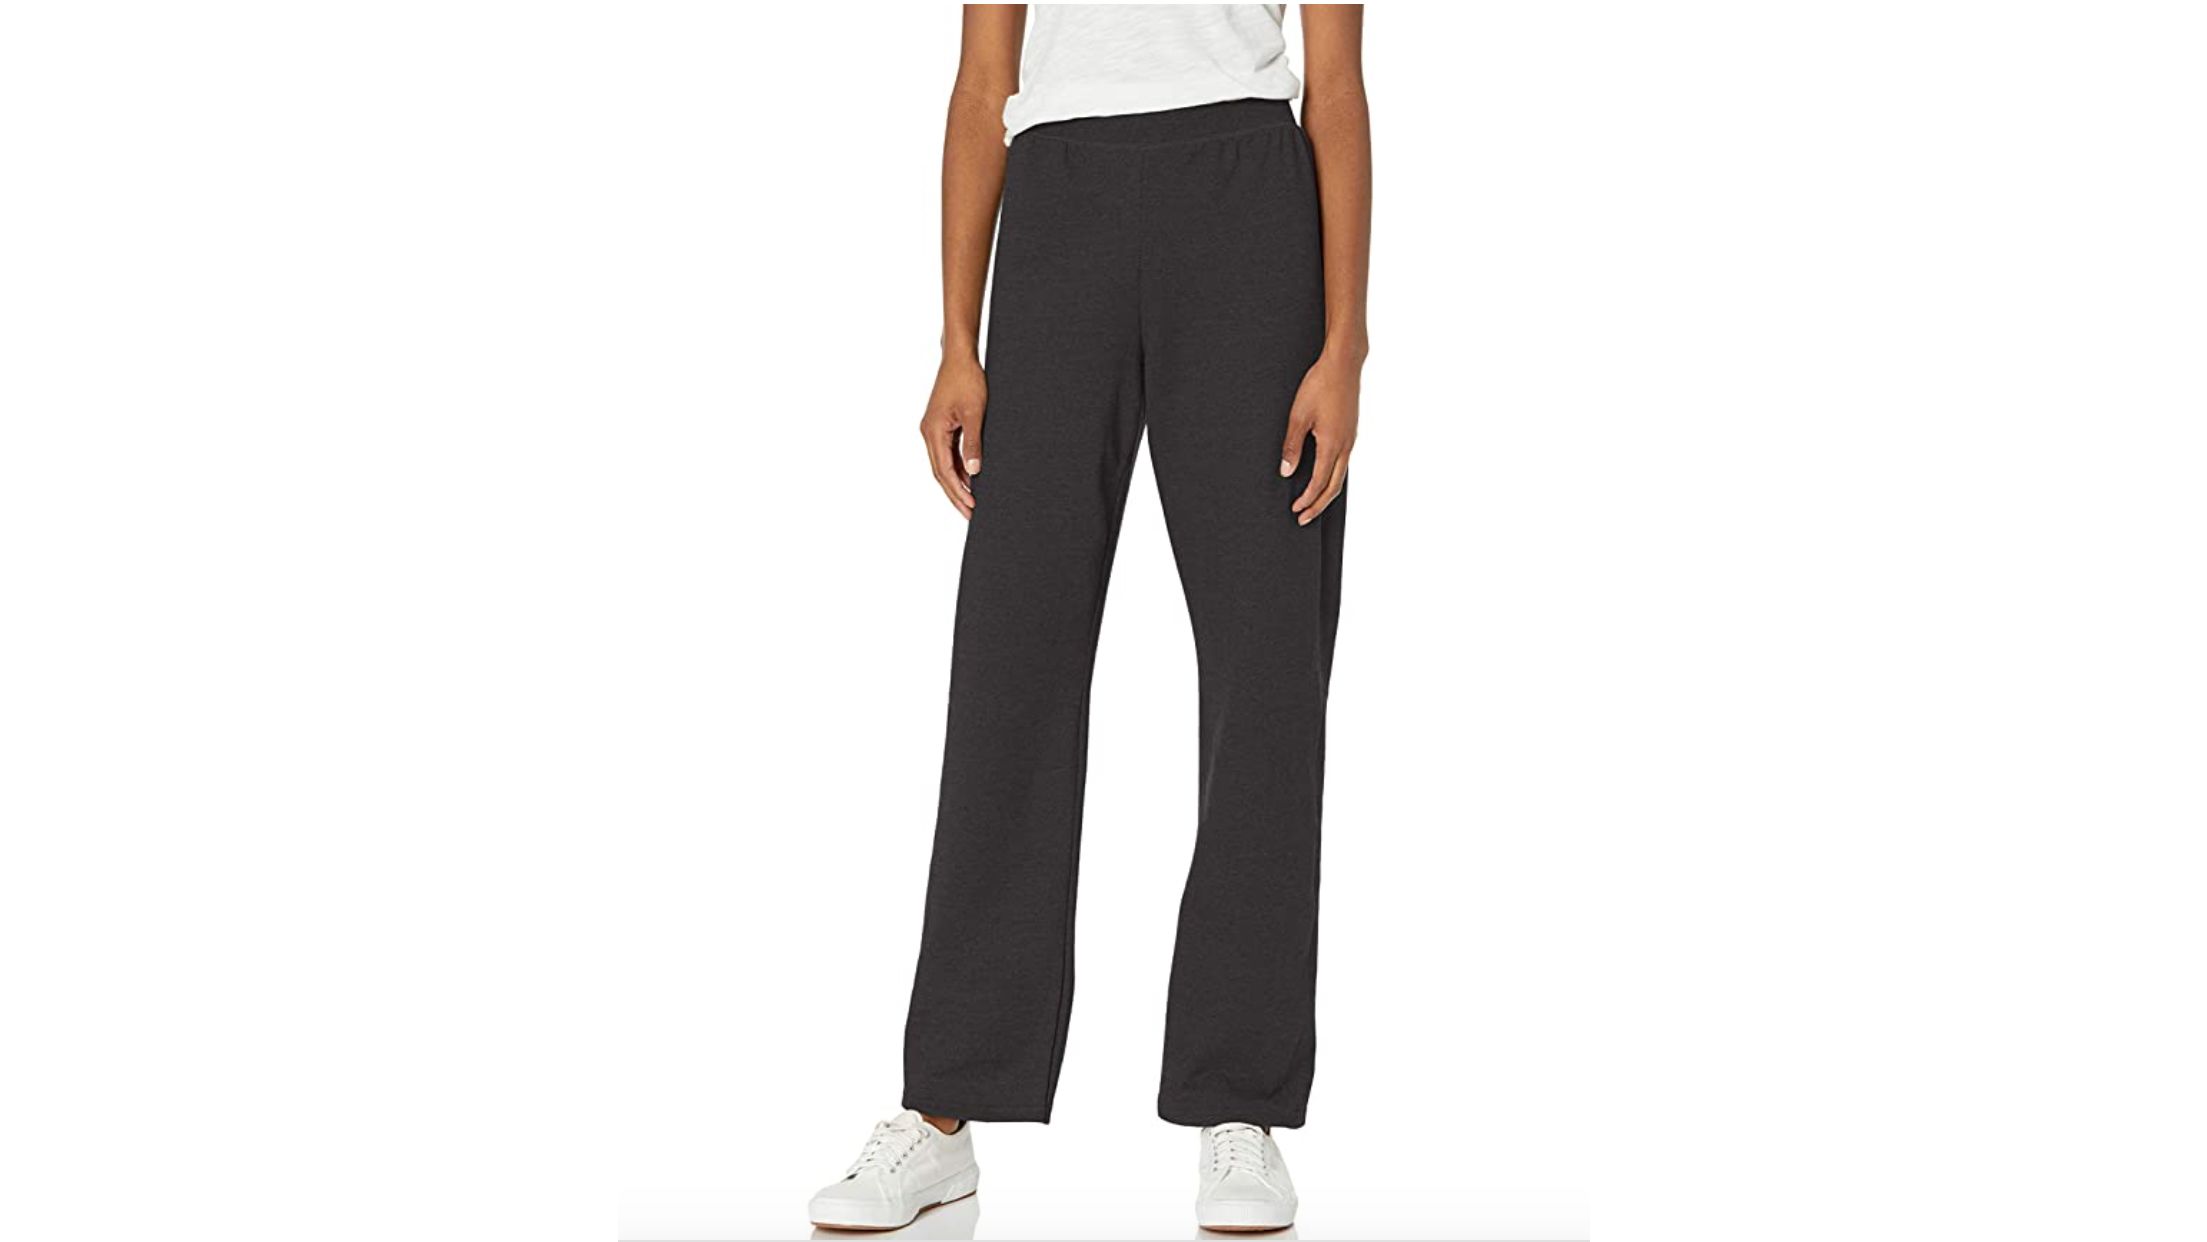 Best lounge pants, according to experts